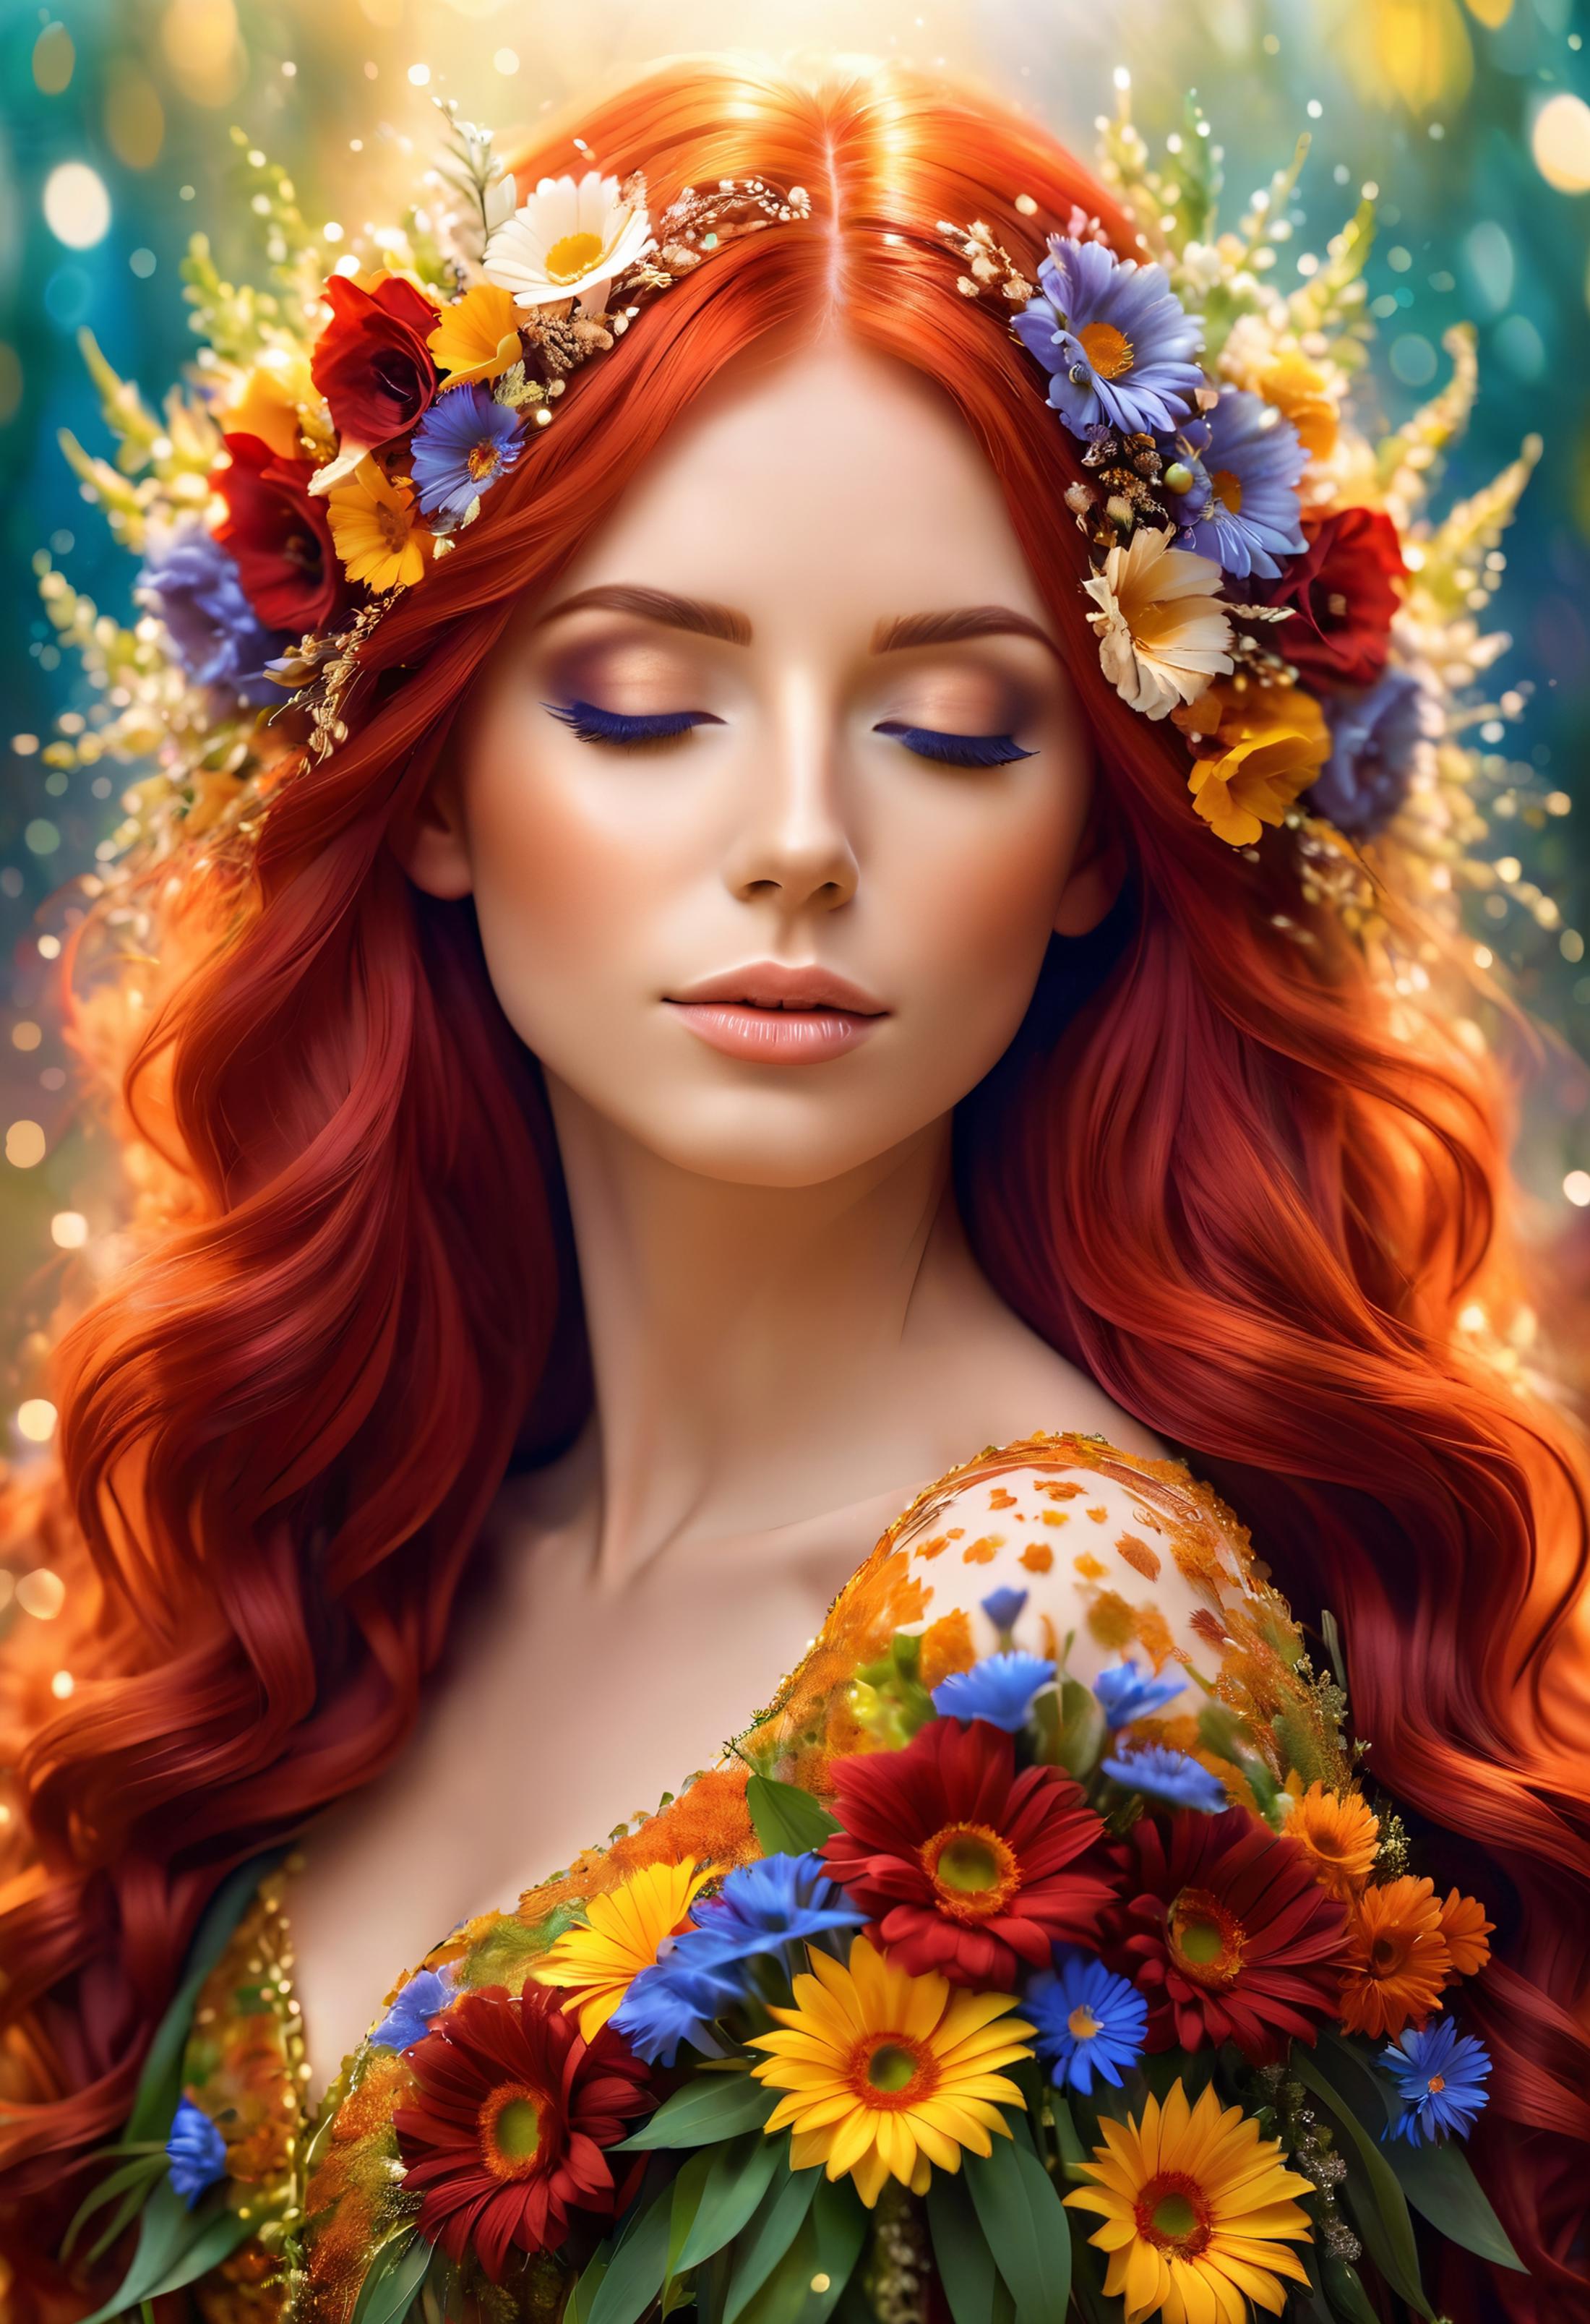 A beautiful red-haired woman wearing a flowered crown and looking down.